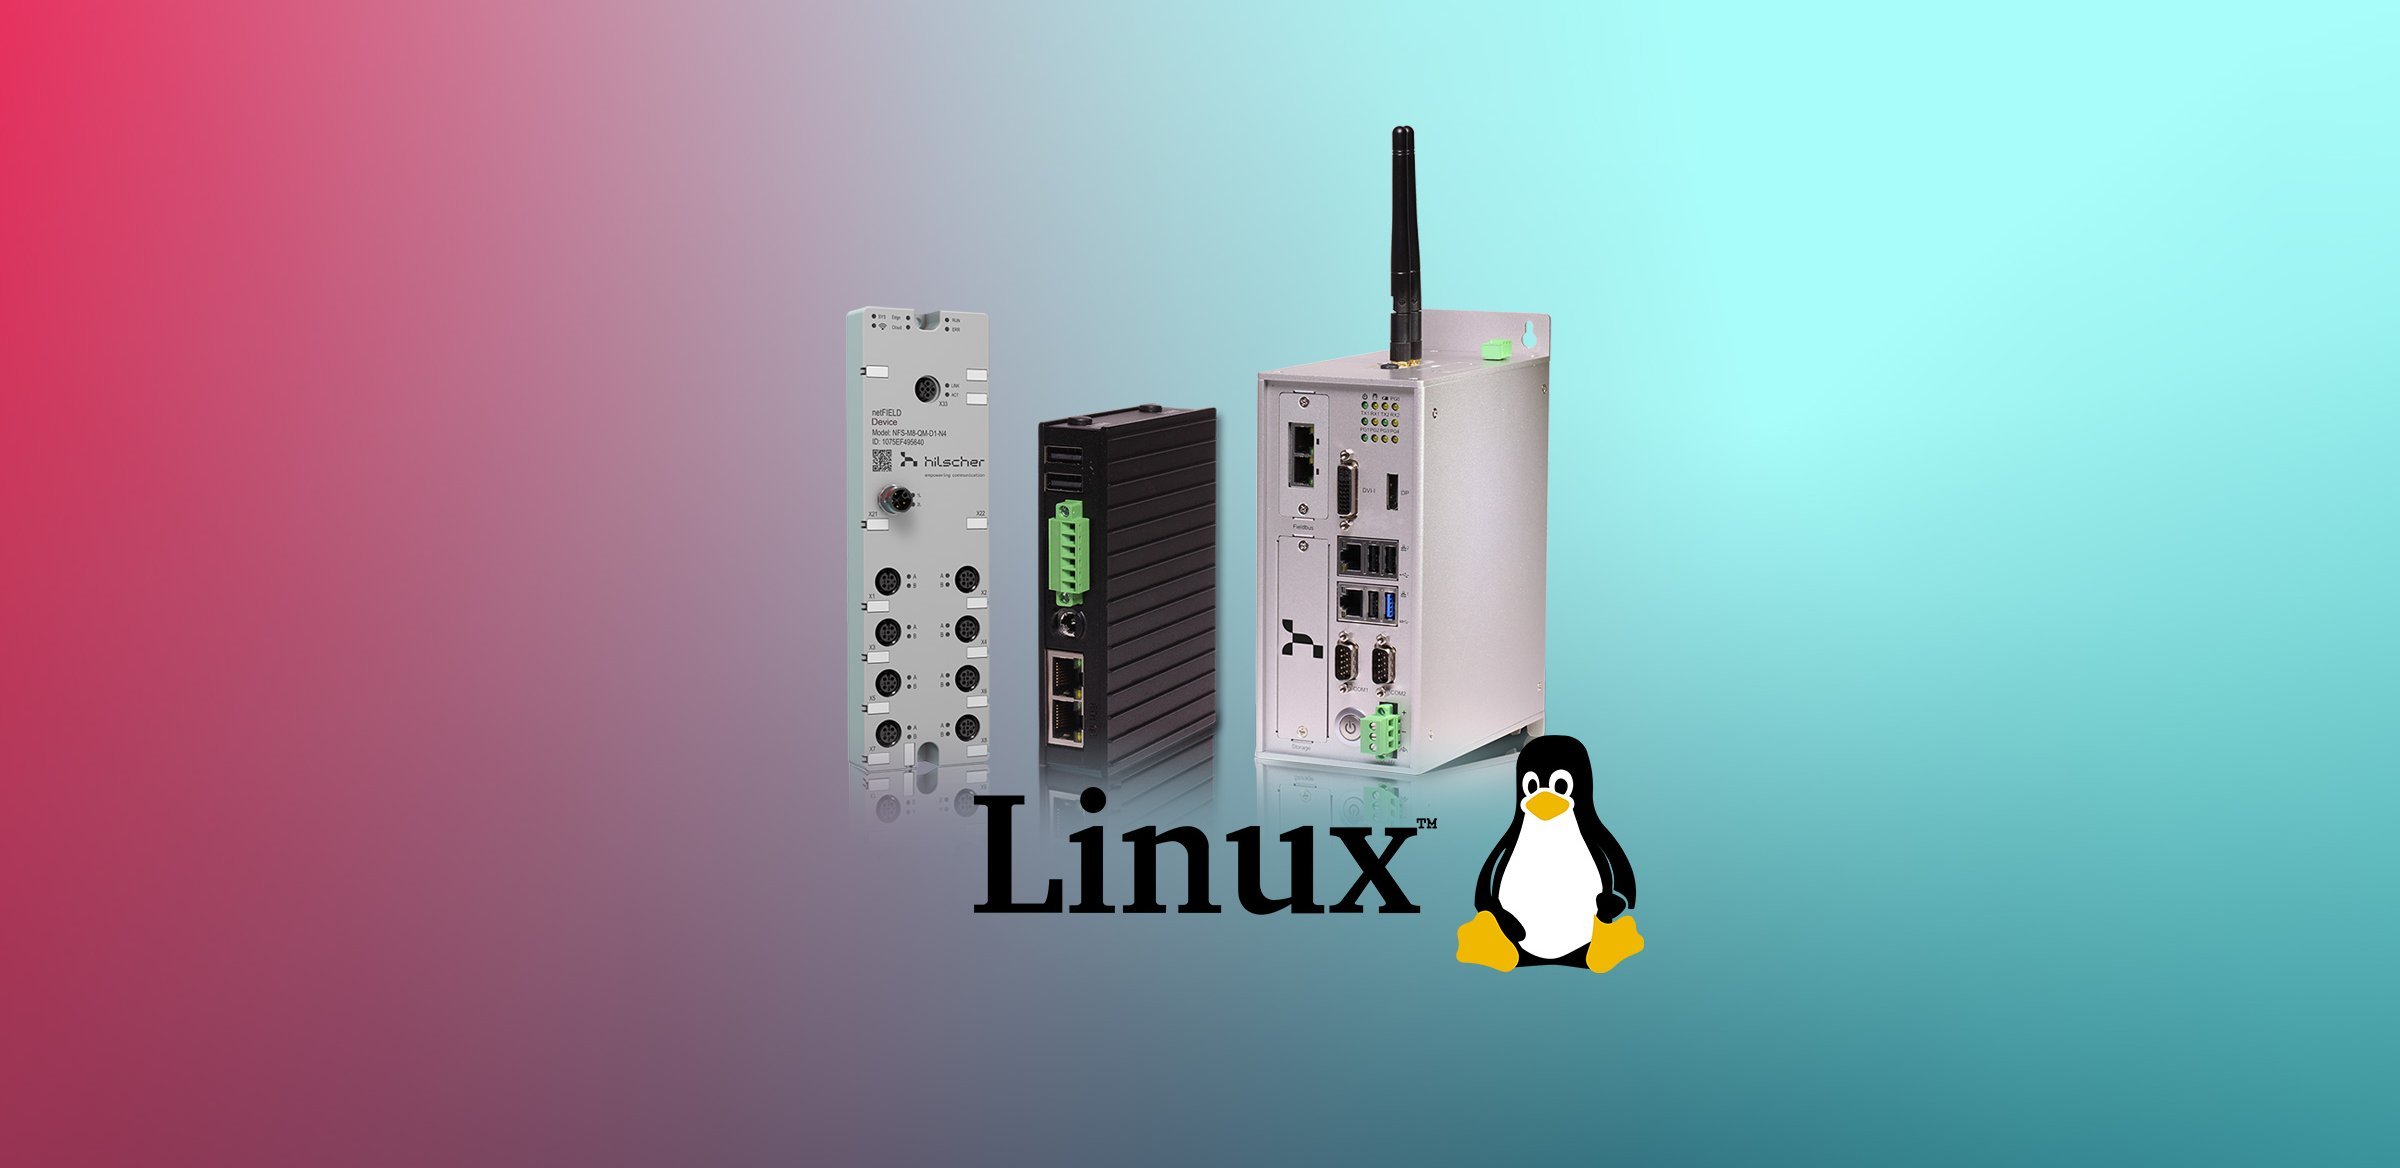 Three gateways are lined up on a colorful background containing red and cyan as well as dark blue. Under the devices, there is a Linux lettering with a penguin (Tux) on the right side.